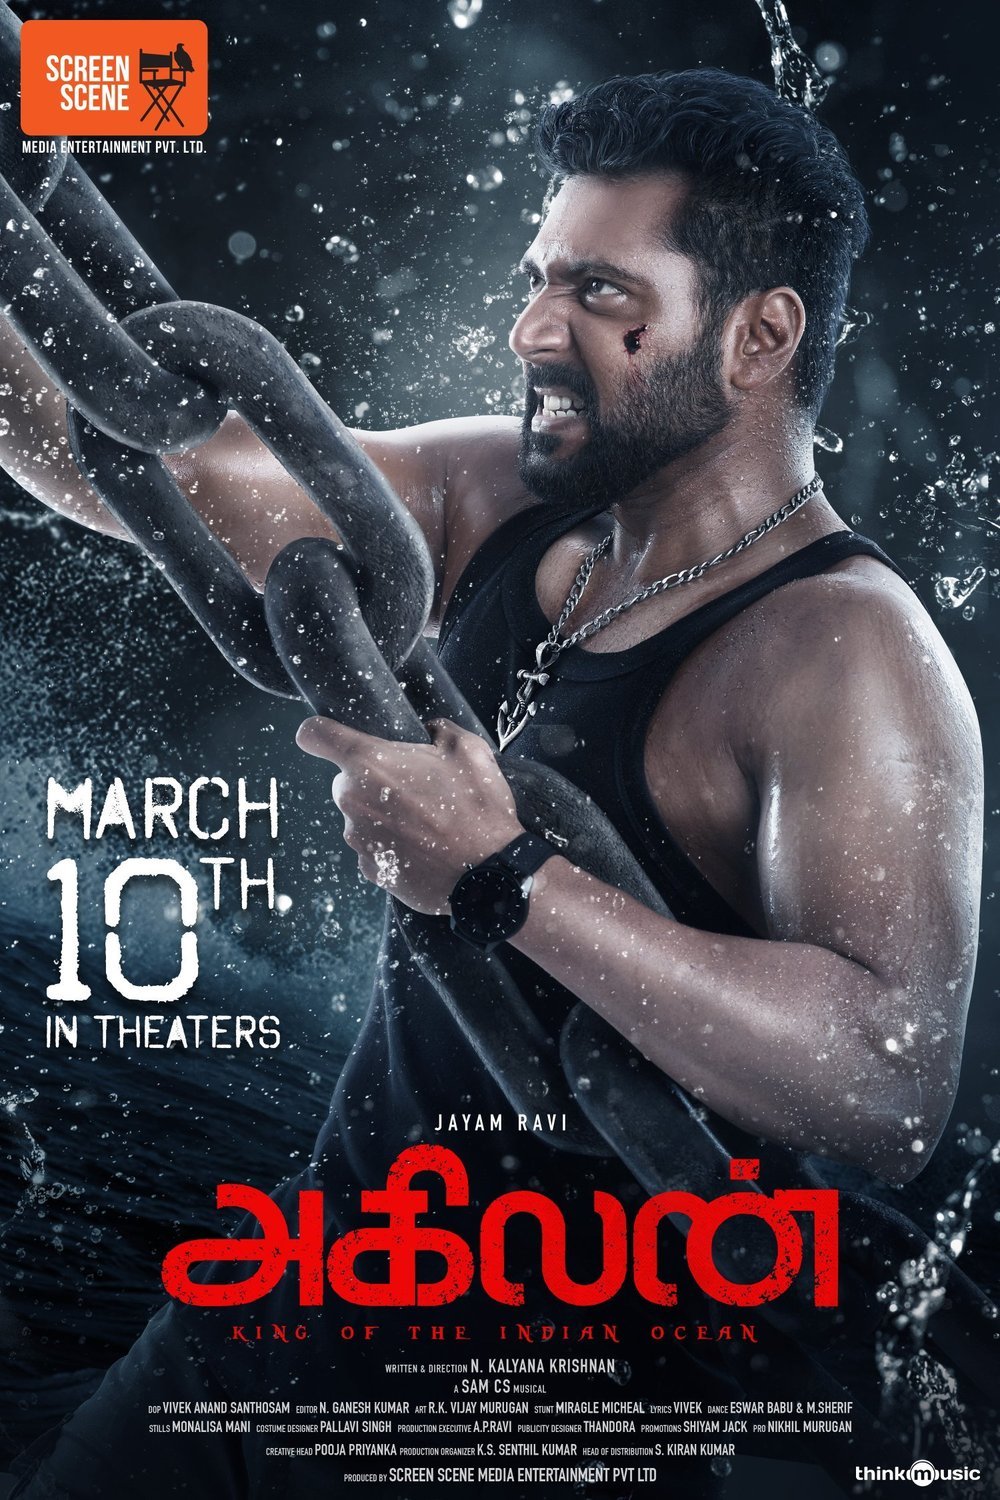 Tamil poster of the movie Agilan